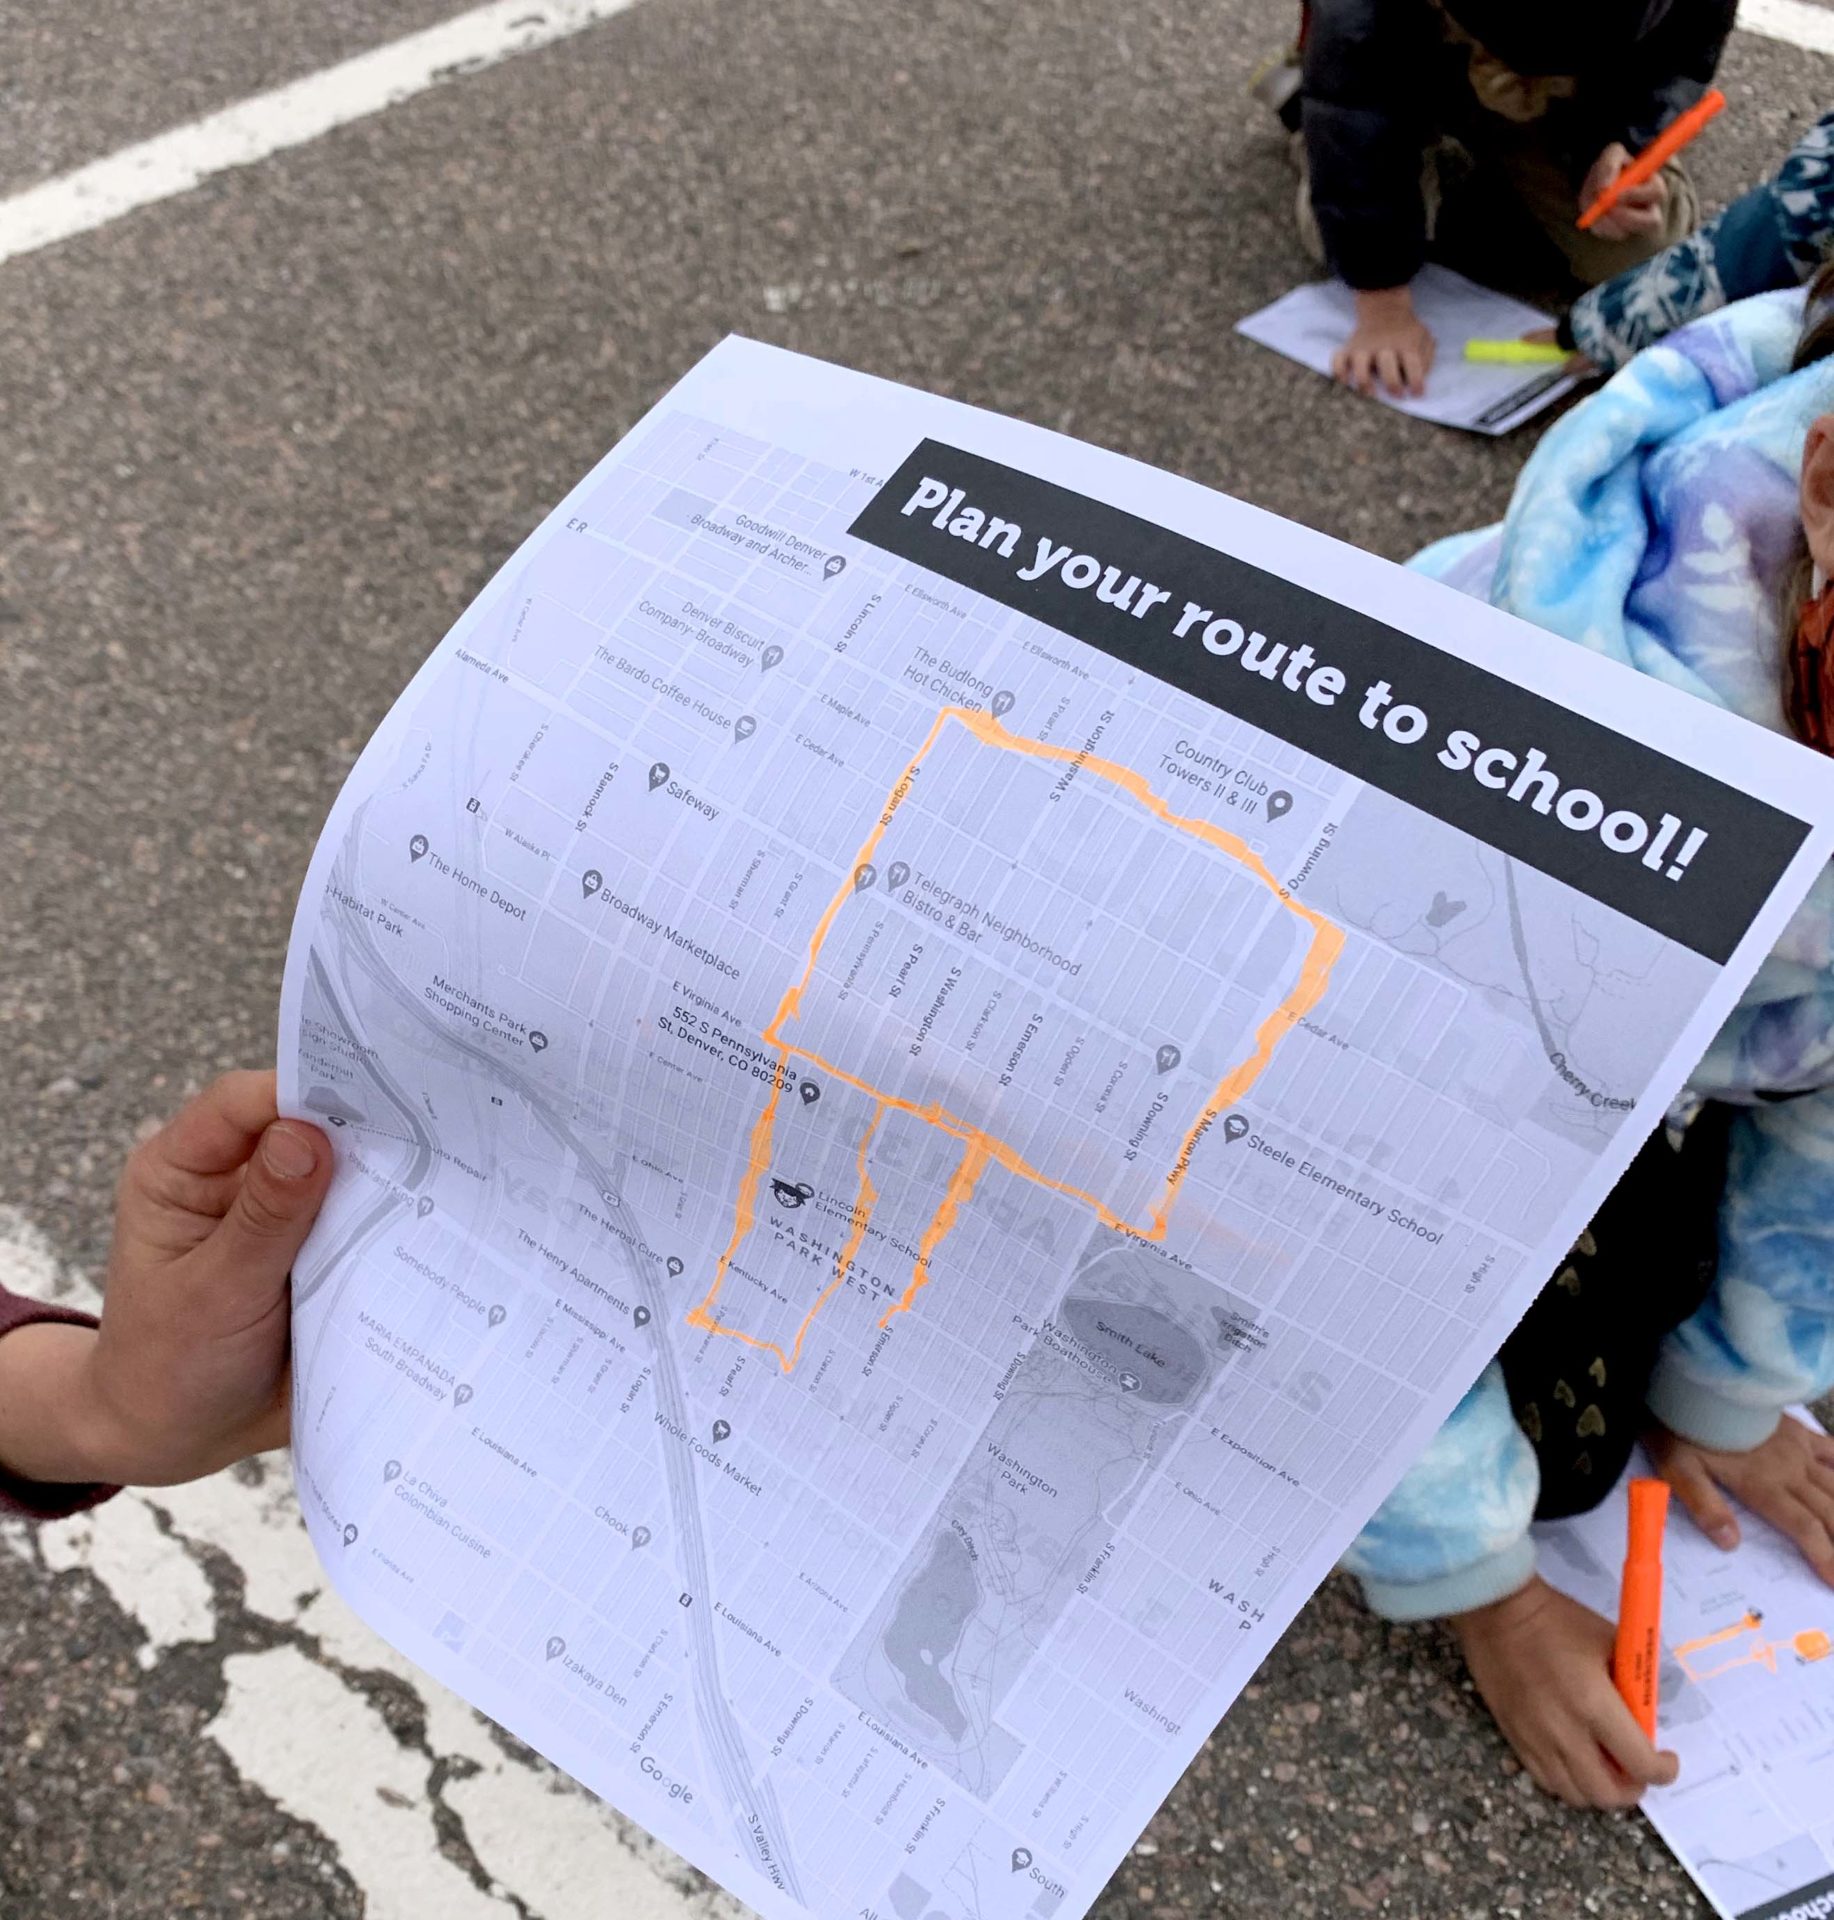 A hand holding a piece of paper that features a map with a route highlighted, and says "Plan your route to school!"